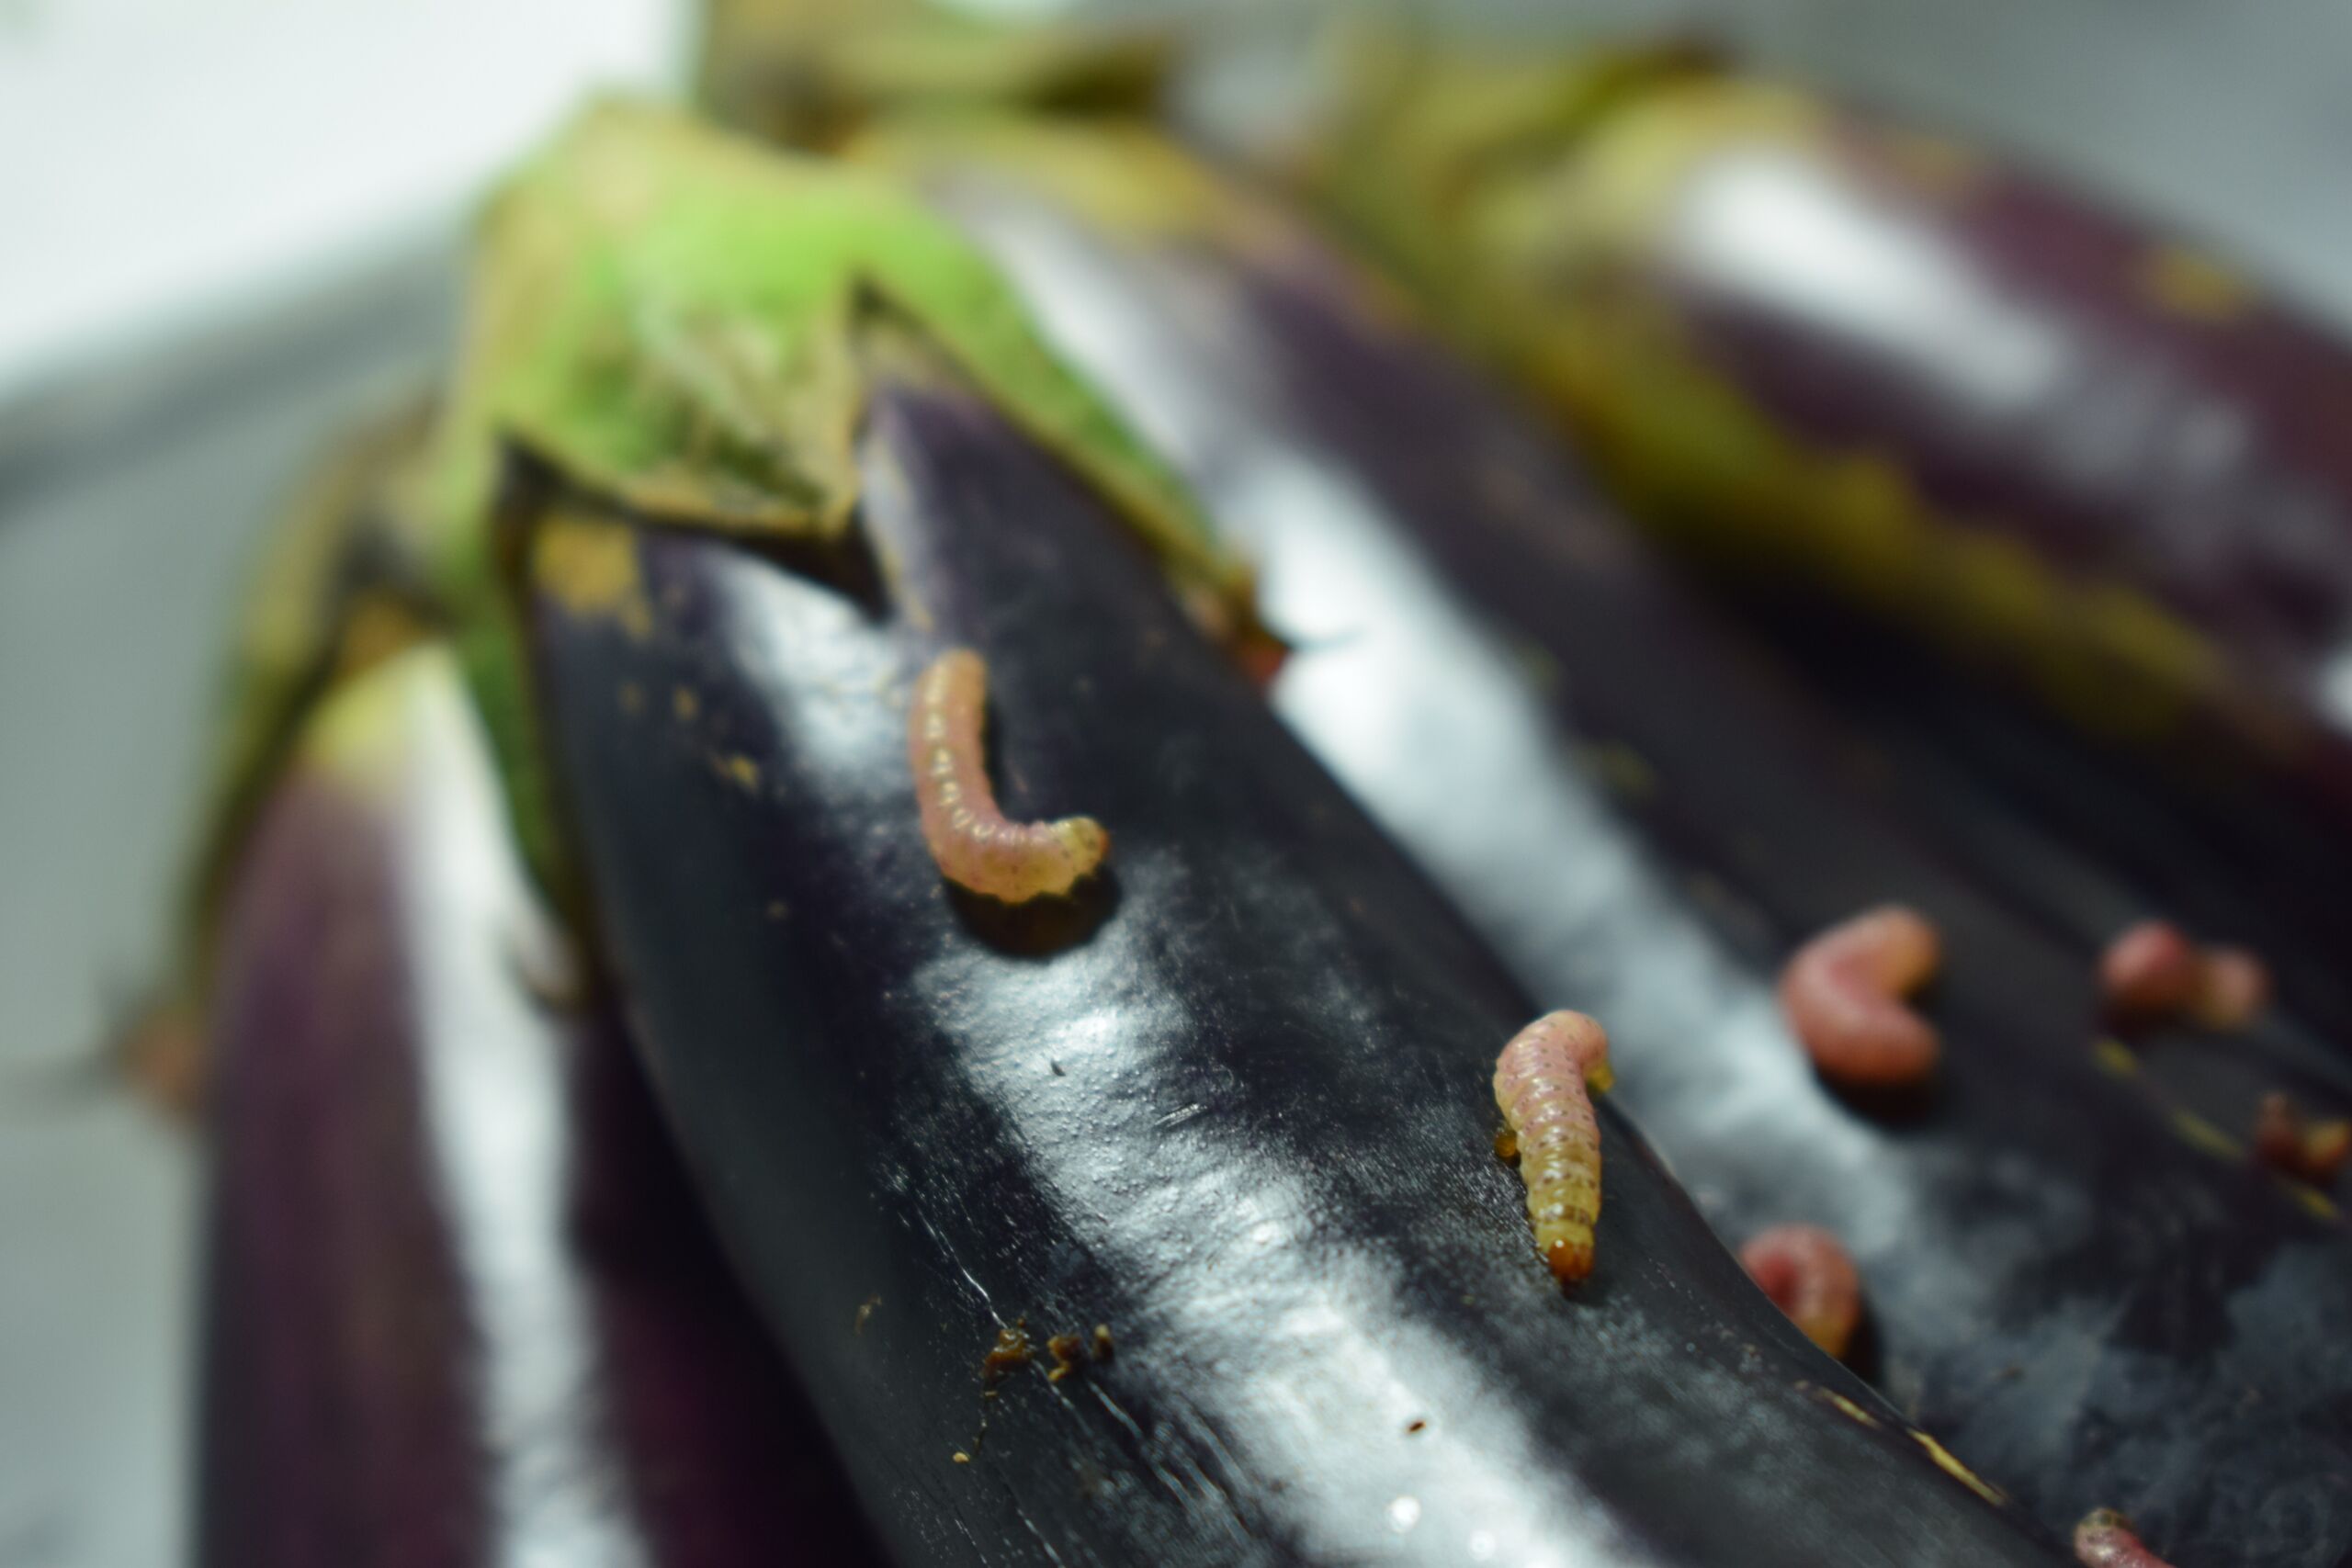 Pesticide use in the Philippines provides a strong justification for Bt eggplant